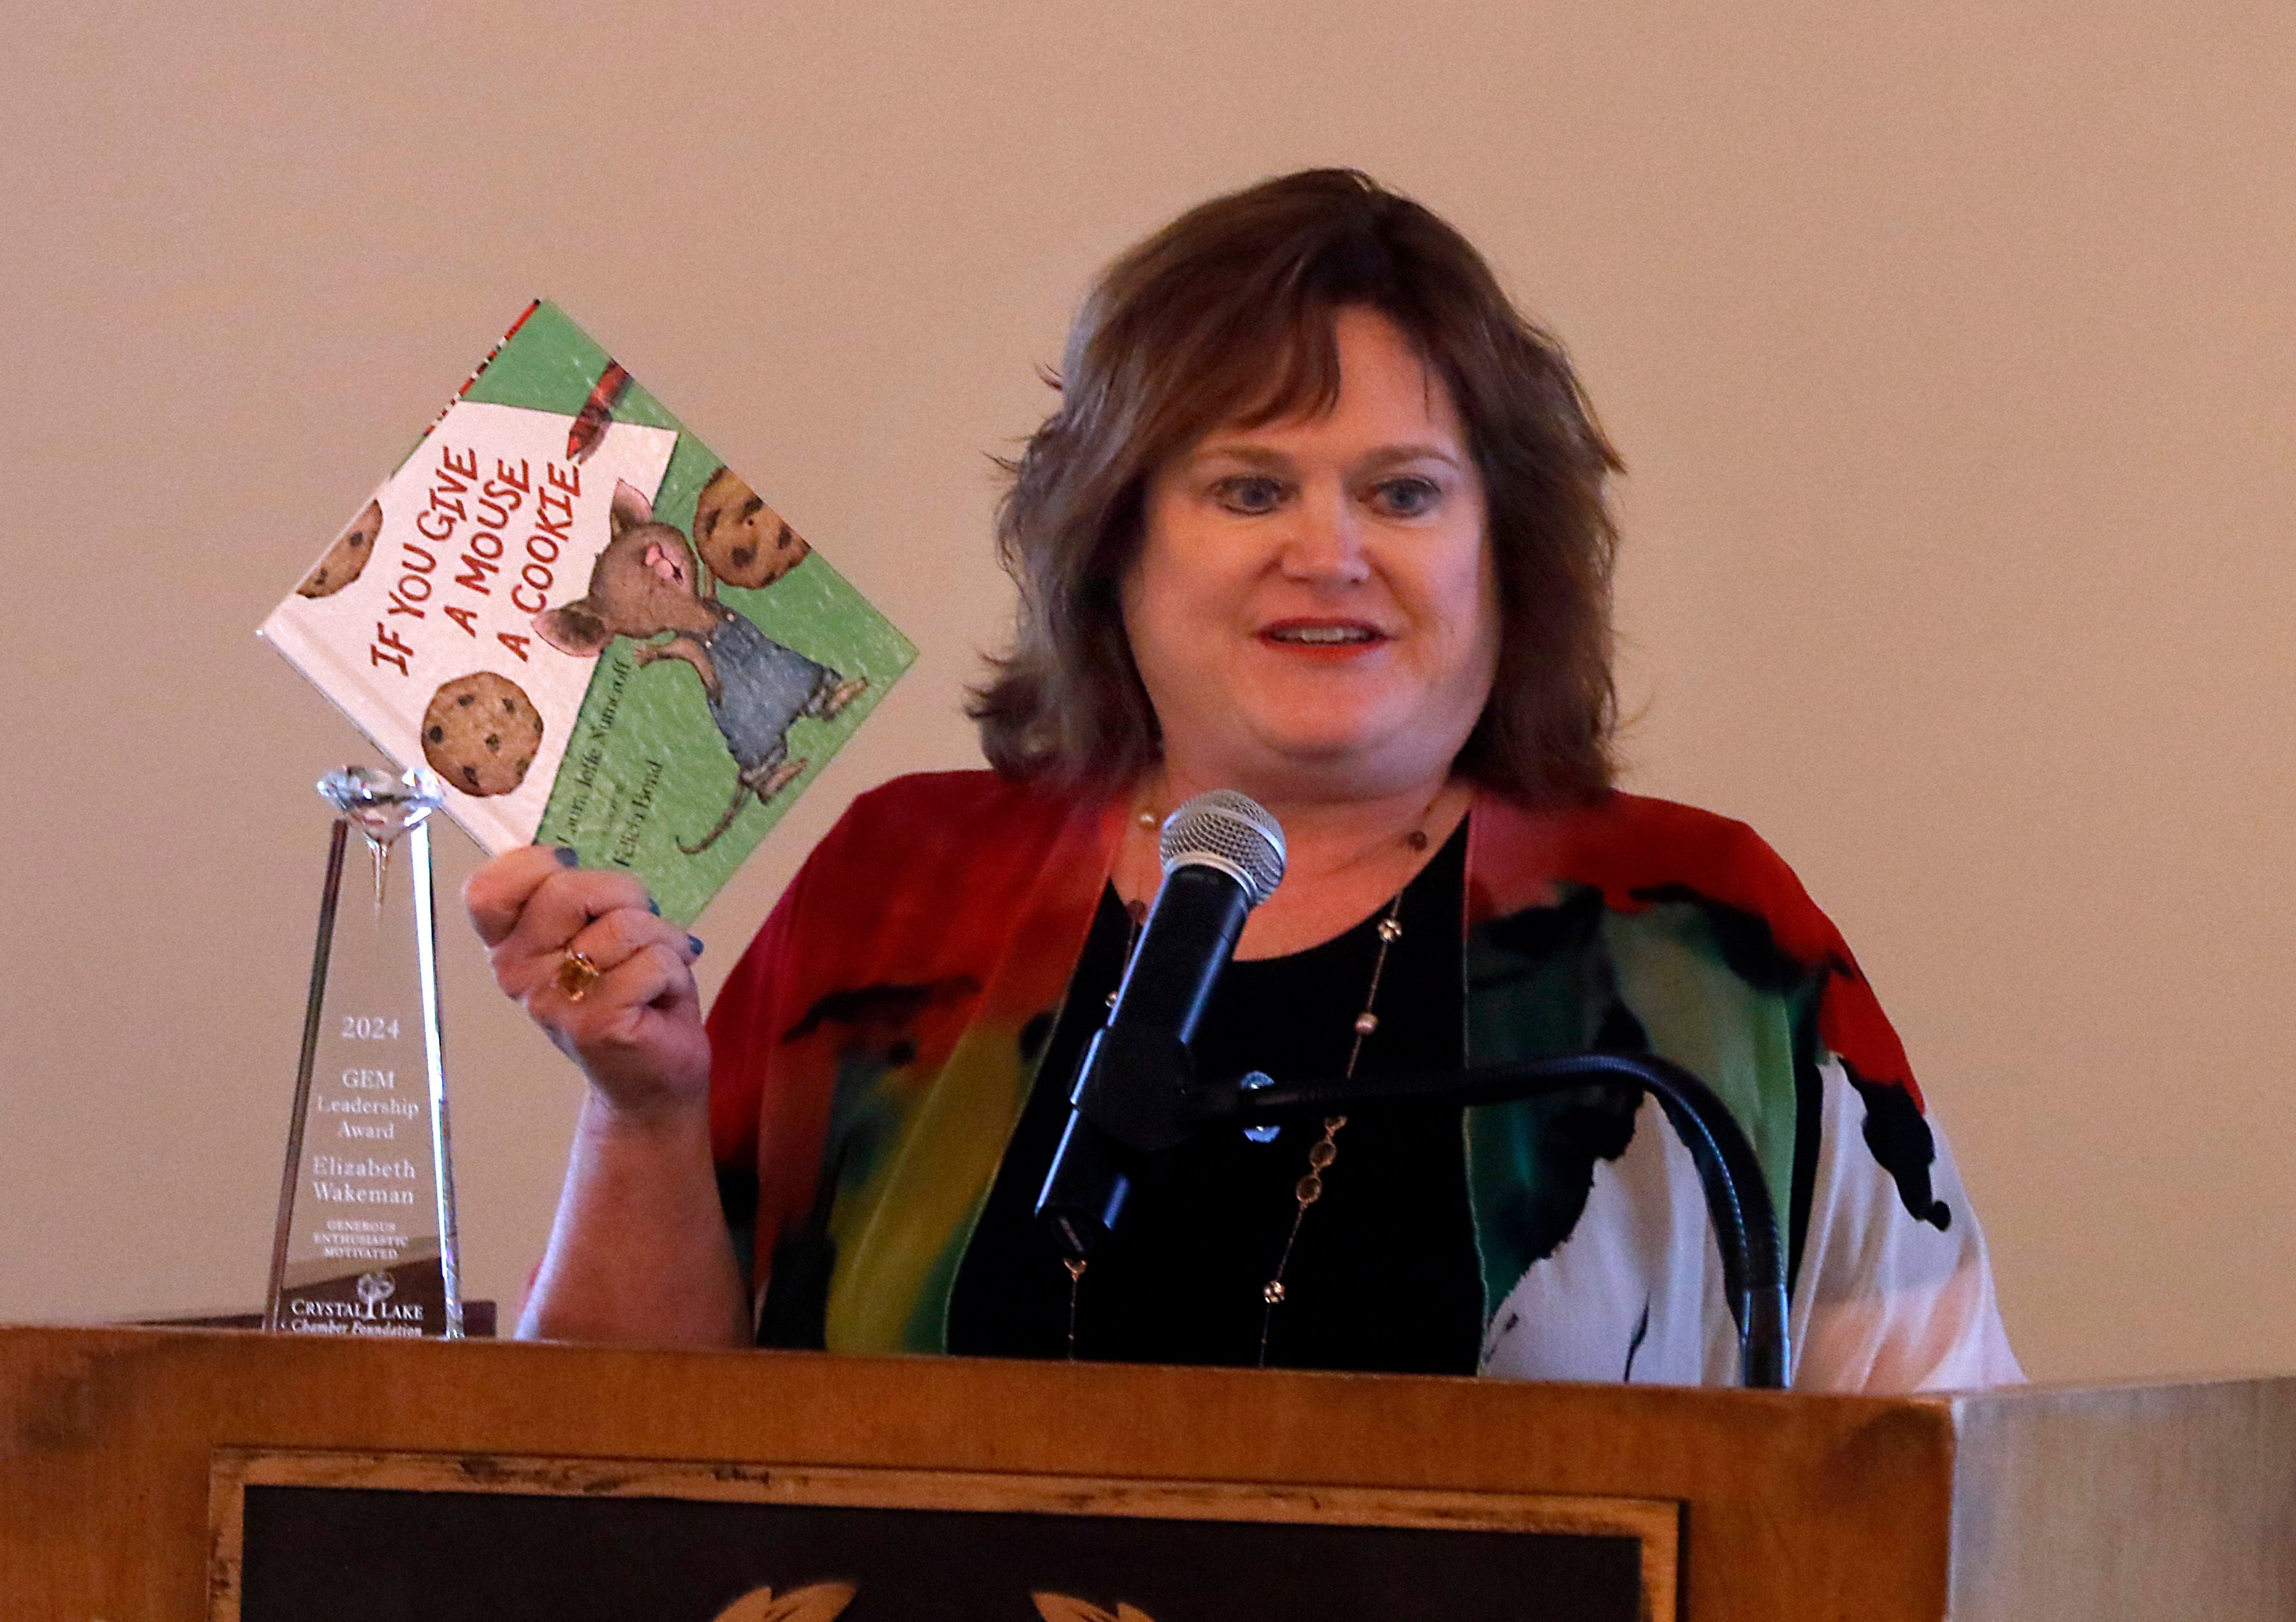 GEM award winner Elizabeth Felt Wakeman holds up the book “If You Give A Mouse a Cookie” during her speech at the Crystal Lake Chamber Foundation's 11th Annual GEM Awards Leadership Celebration on April 18, 2024, where she was an honoree. 